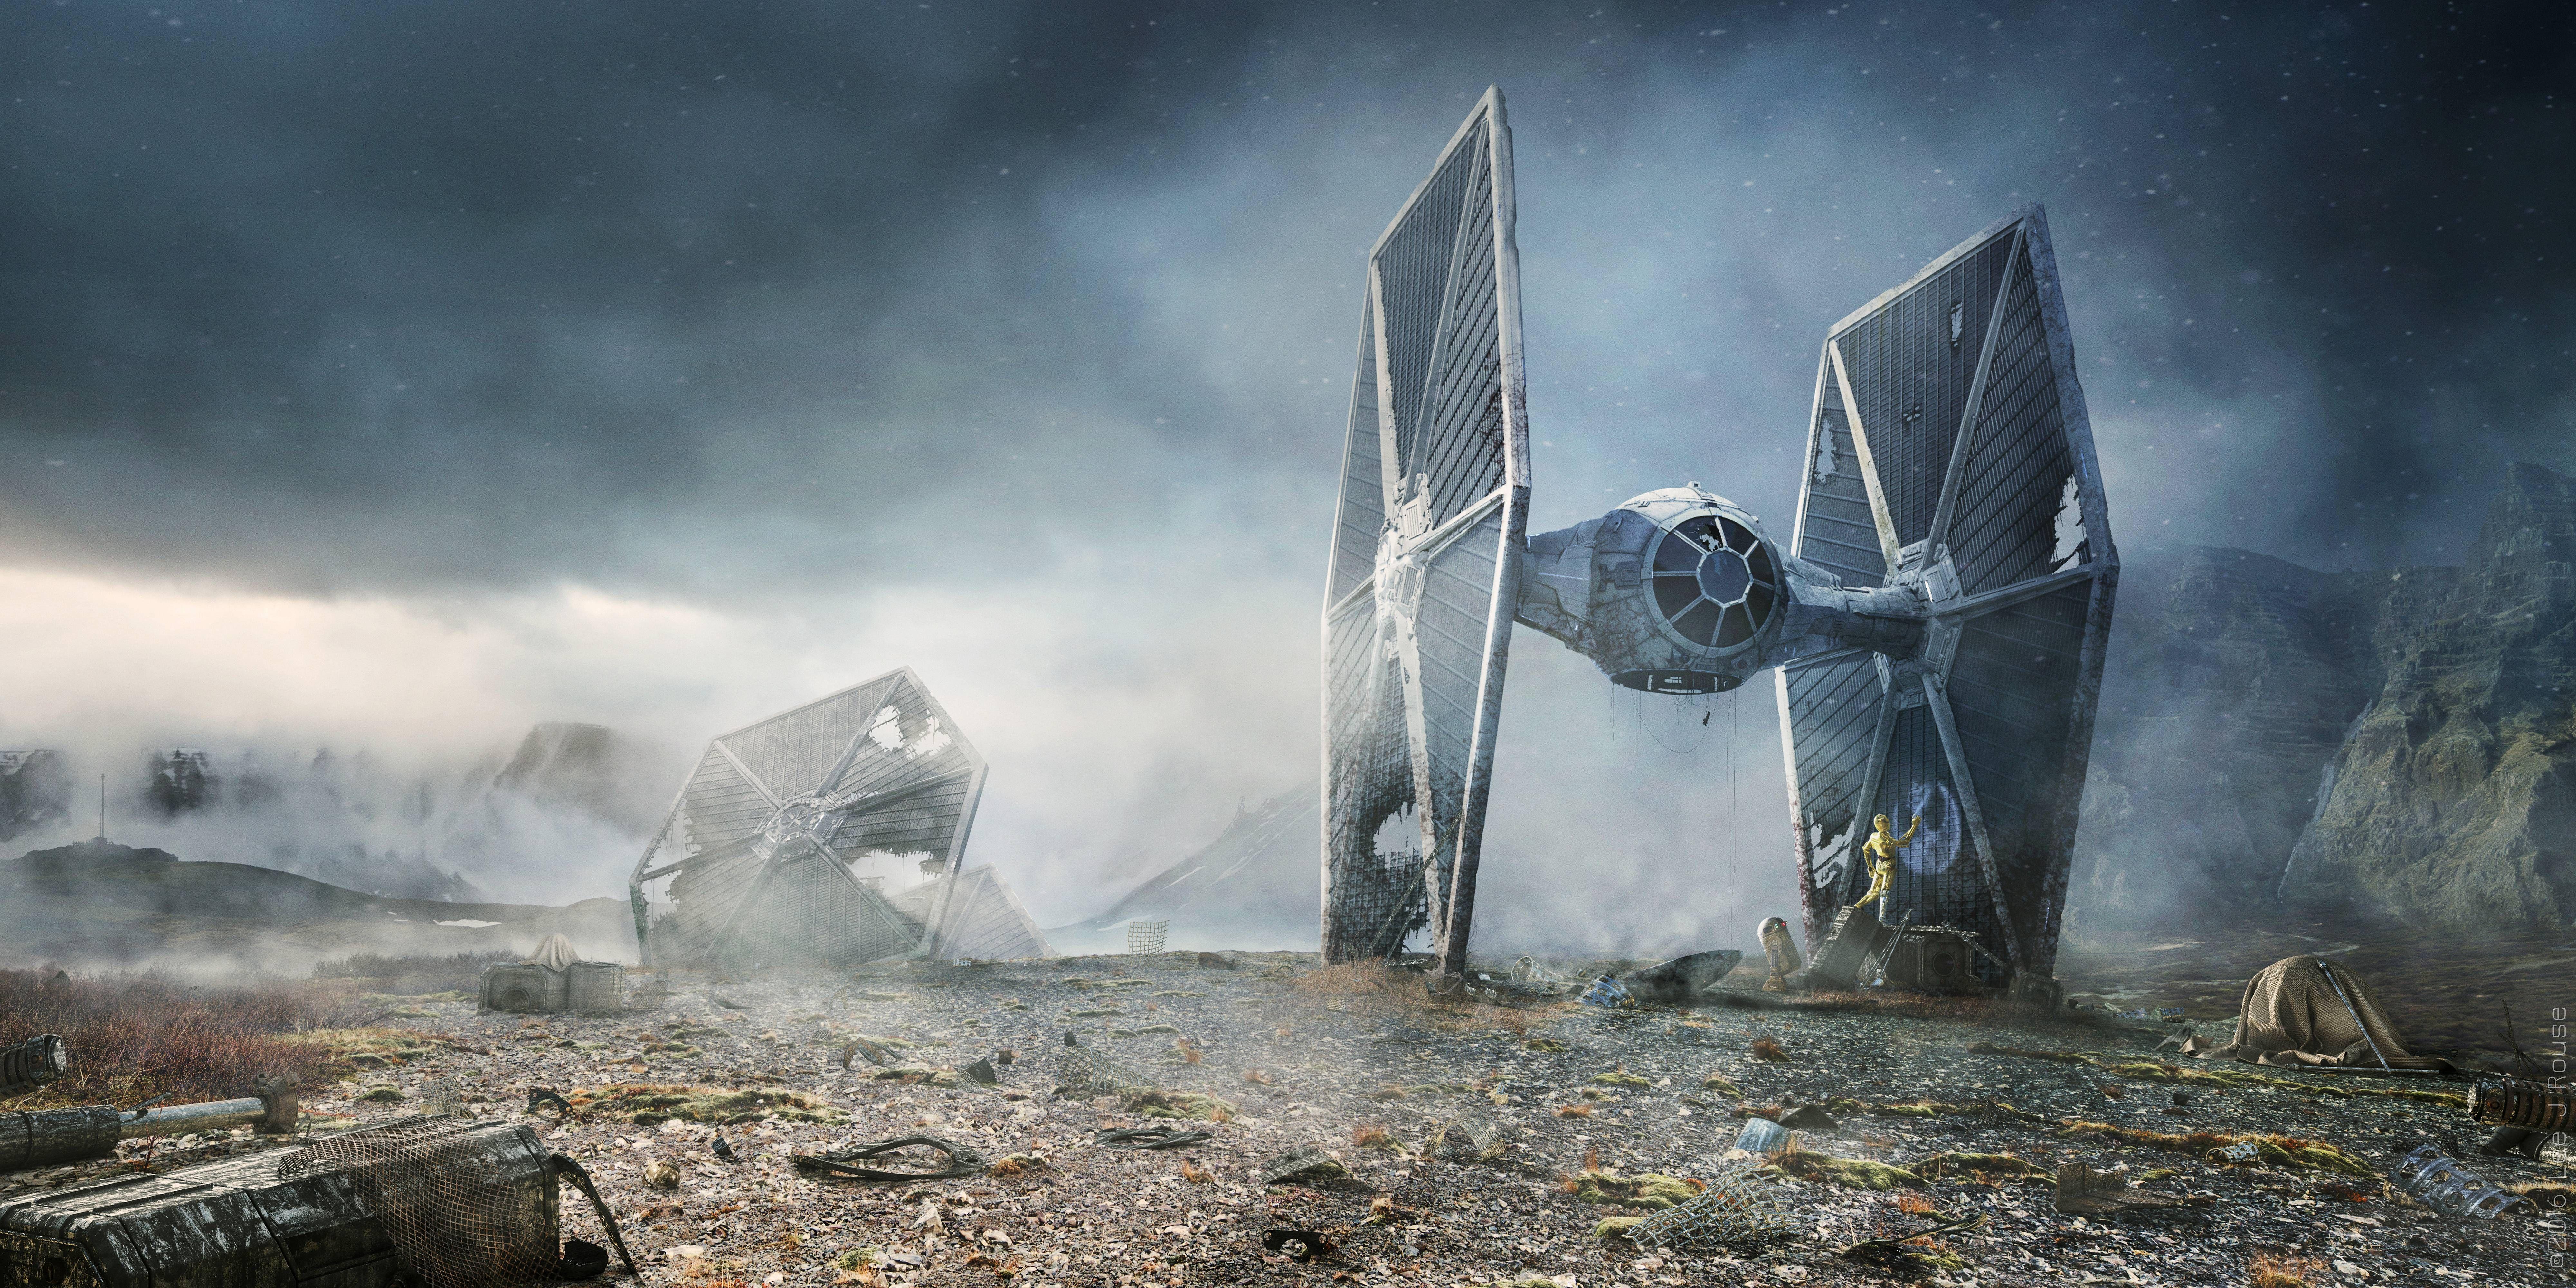 4K Ultra HD Star Wars Wallpaper and Background Image. Star wars wallpaper, Star wars illustration, Star wars background